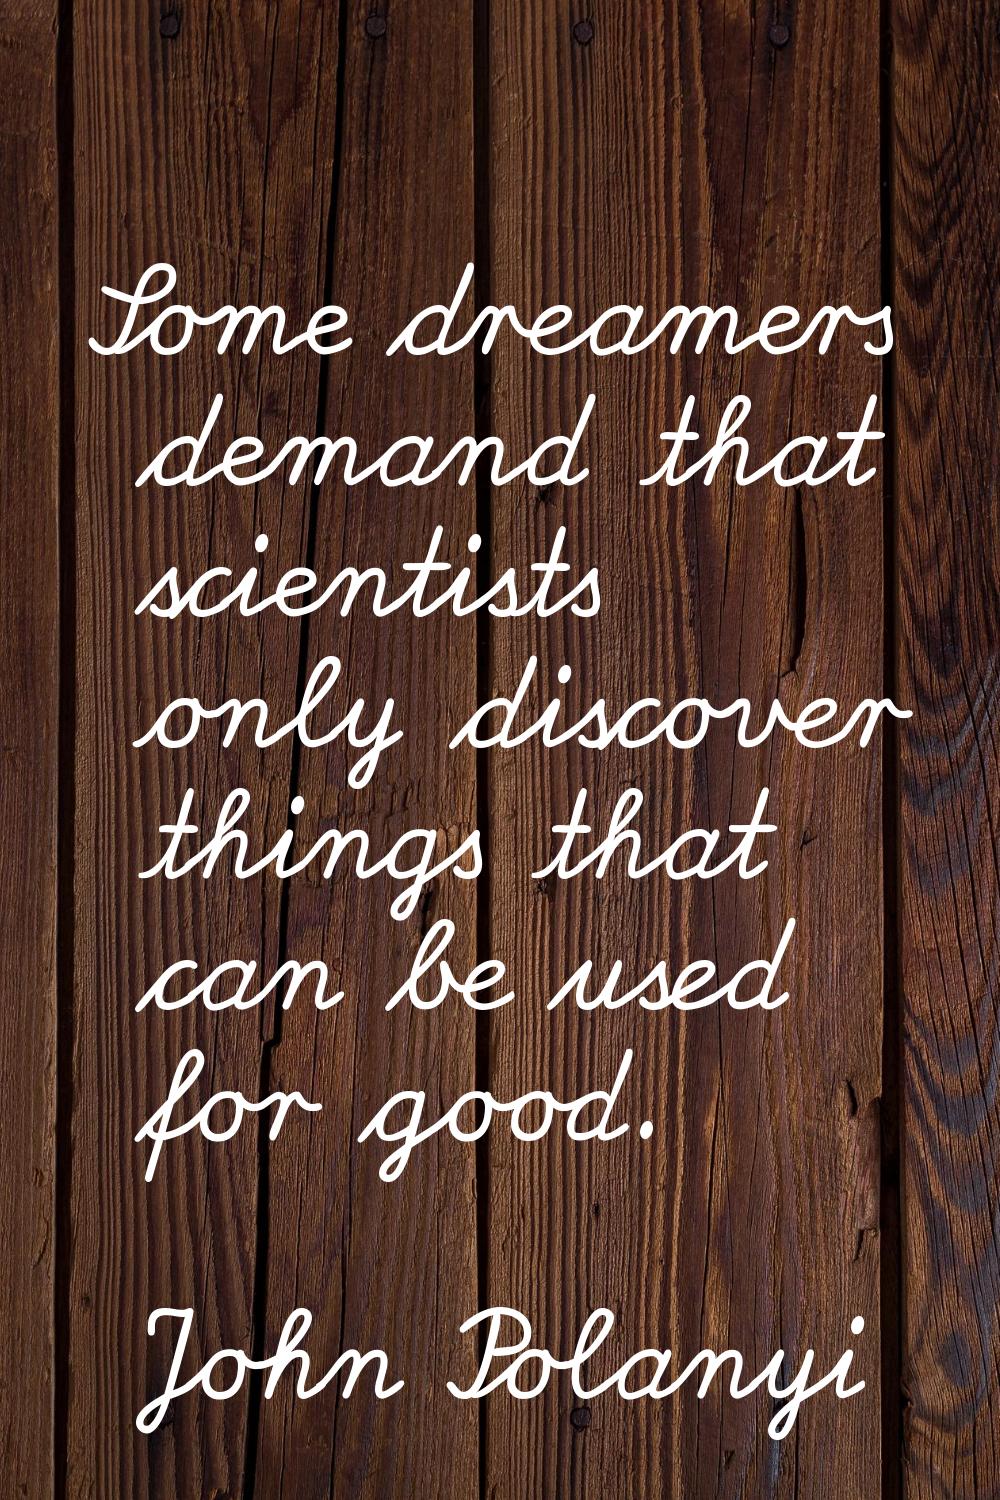 Some dreamers demand that scientists only discover things that can be used for good.